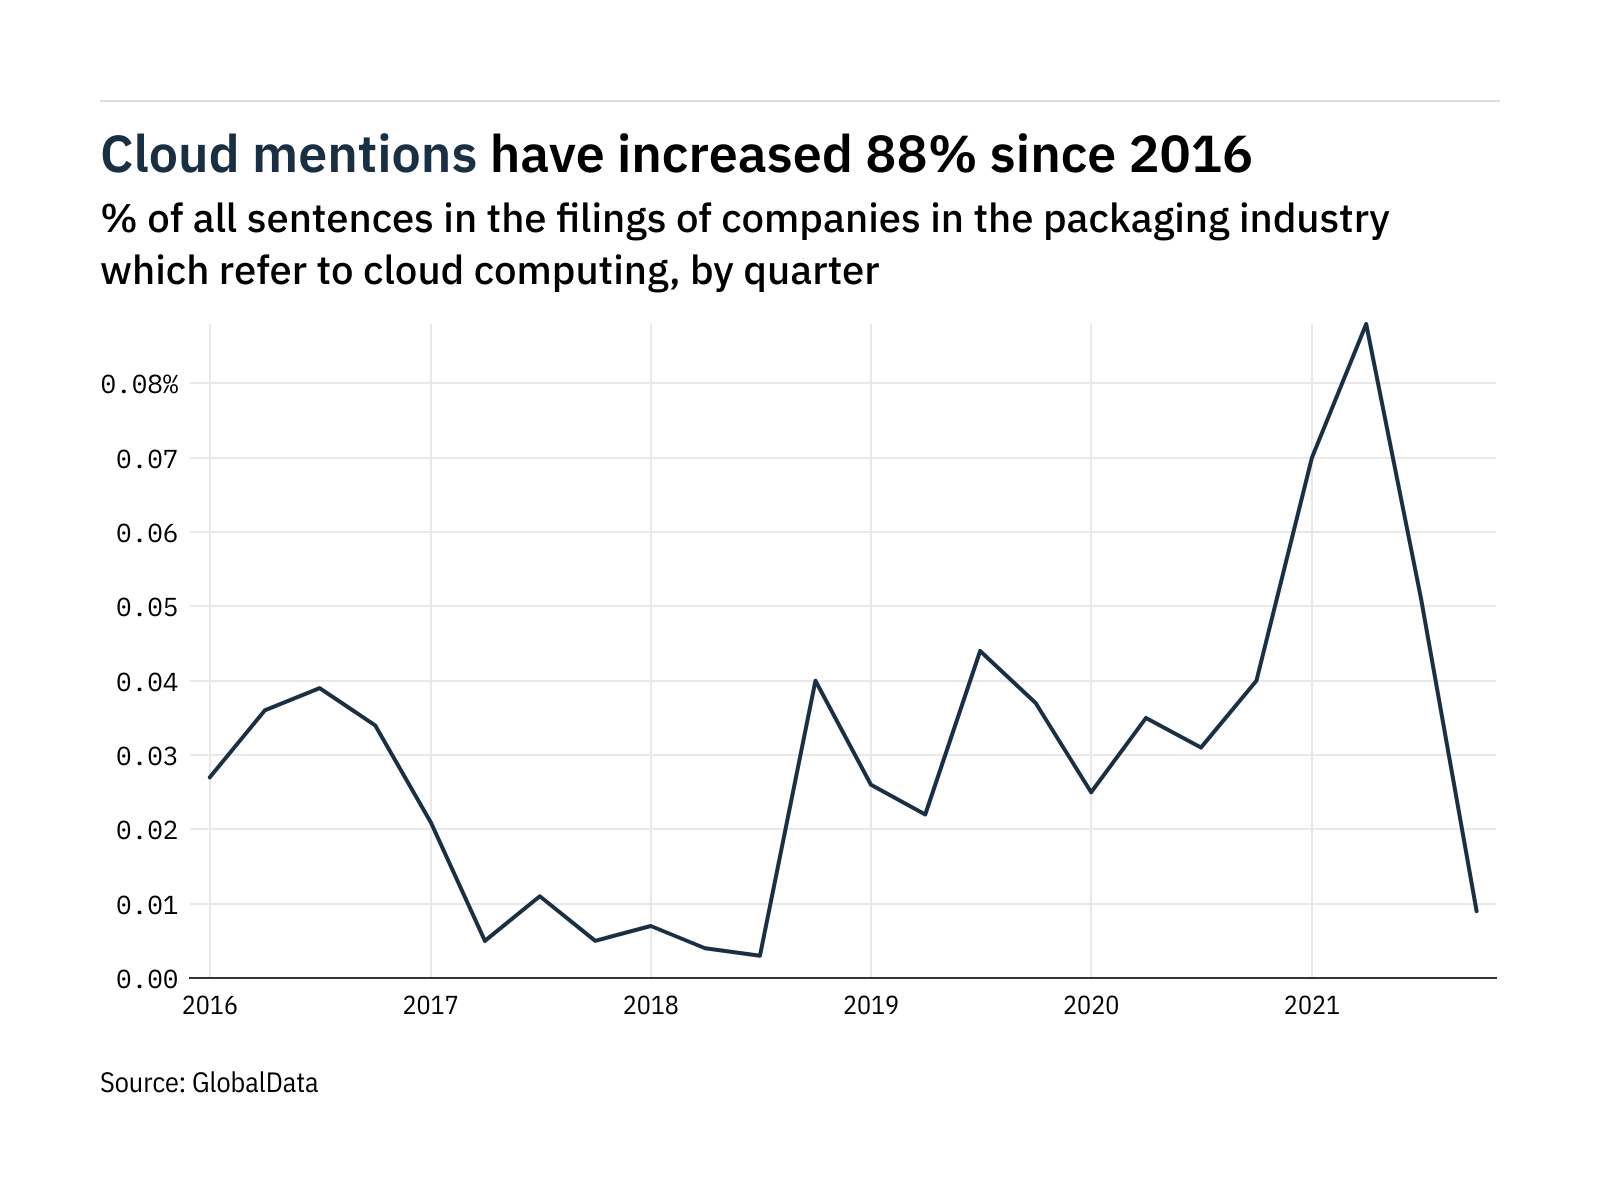 Filings buzz in the packaging industry: 82% decrease in cloud computing mentions in Q4 of 2021